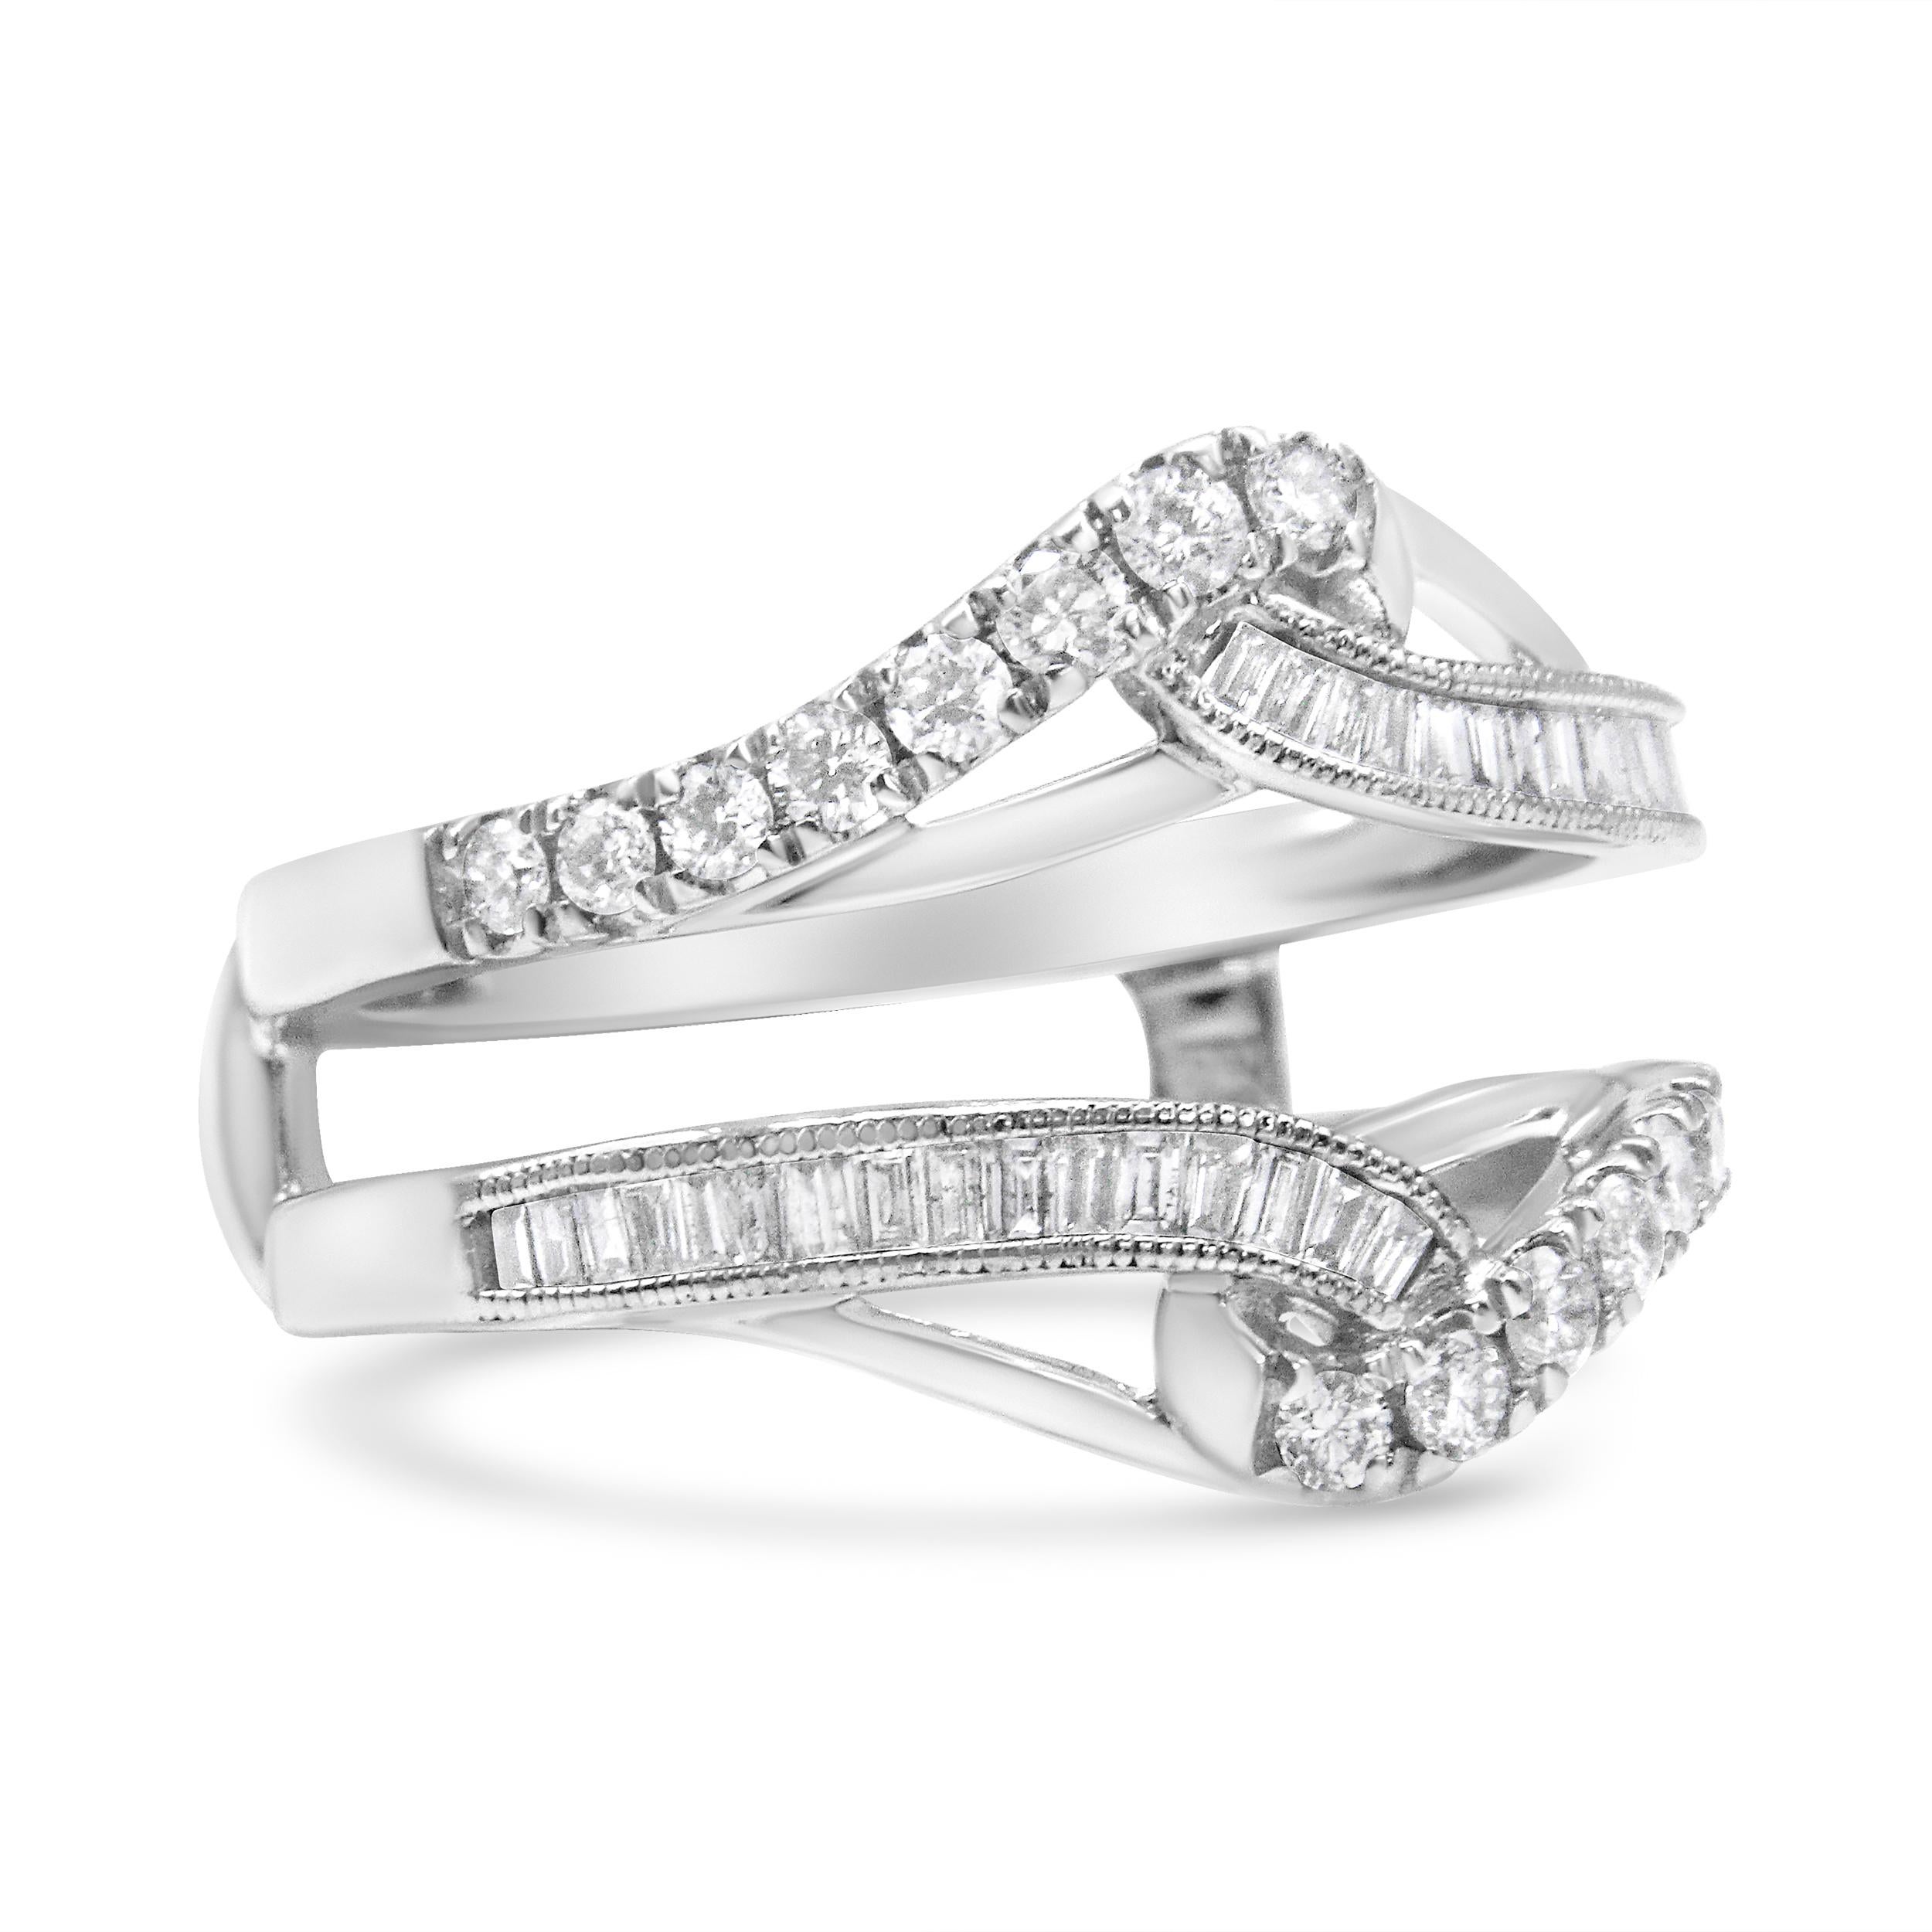 This sparkling ring enhancer is a piece that will instantly elevate her bridal or diamond solitaire ring. The look displays a top and bottom row of round diamonds in prong settings, offset by complementing rows of baguette diamonds in an invisible